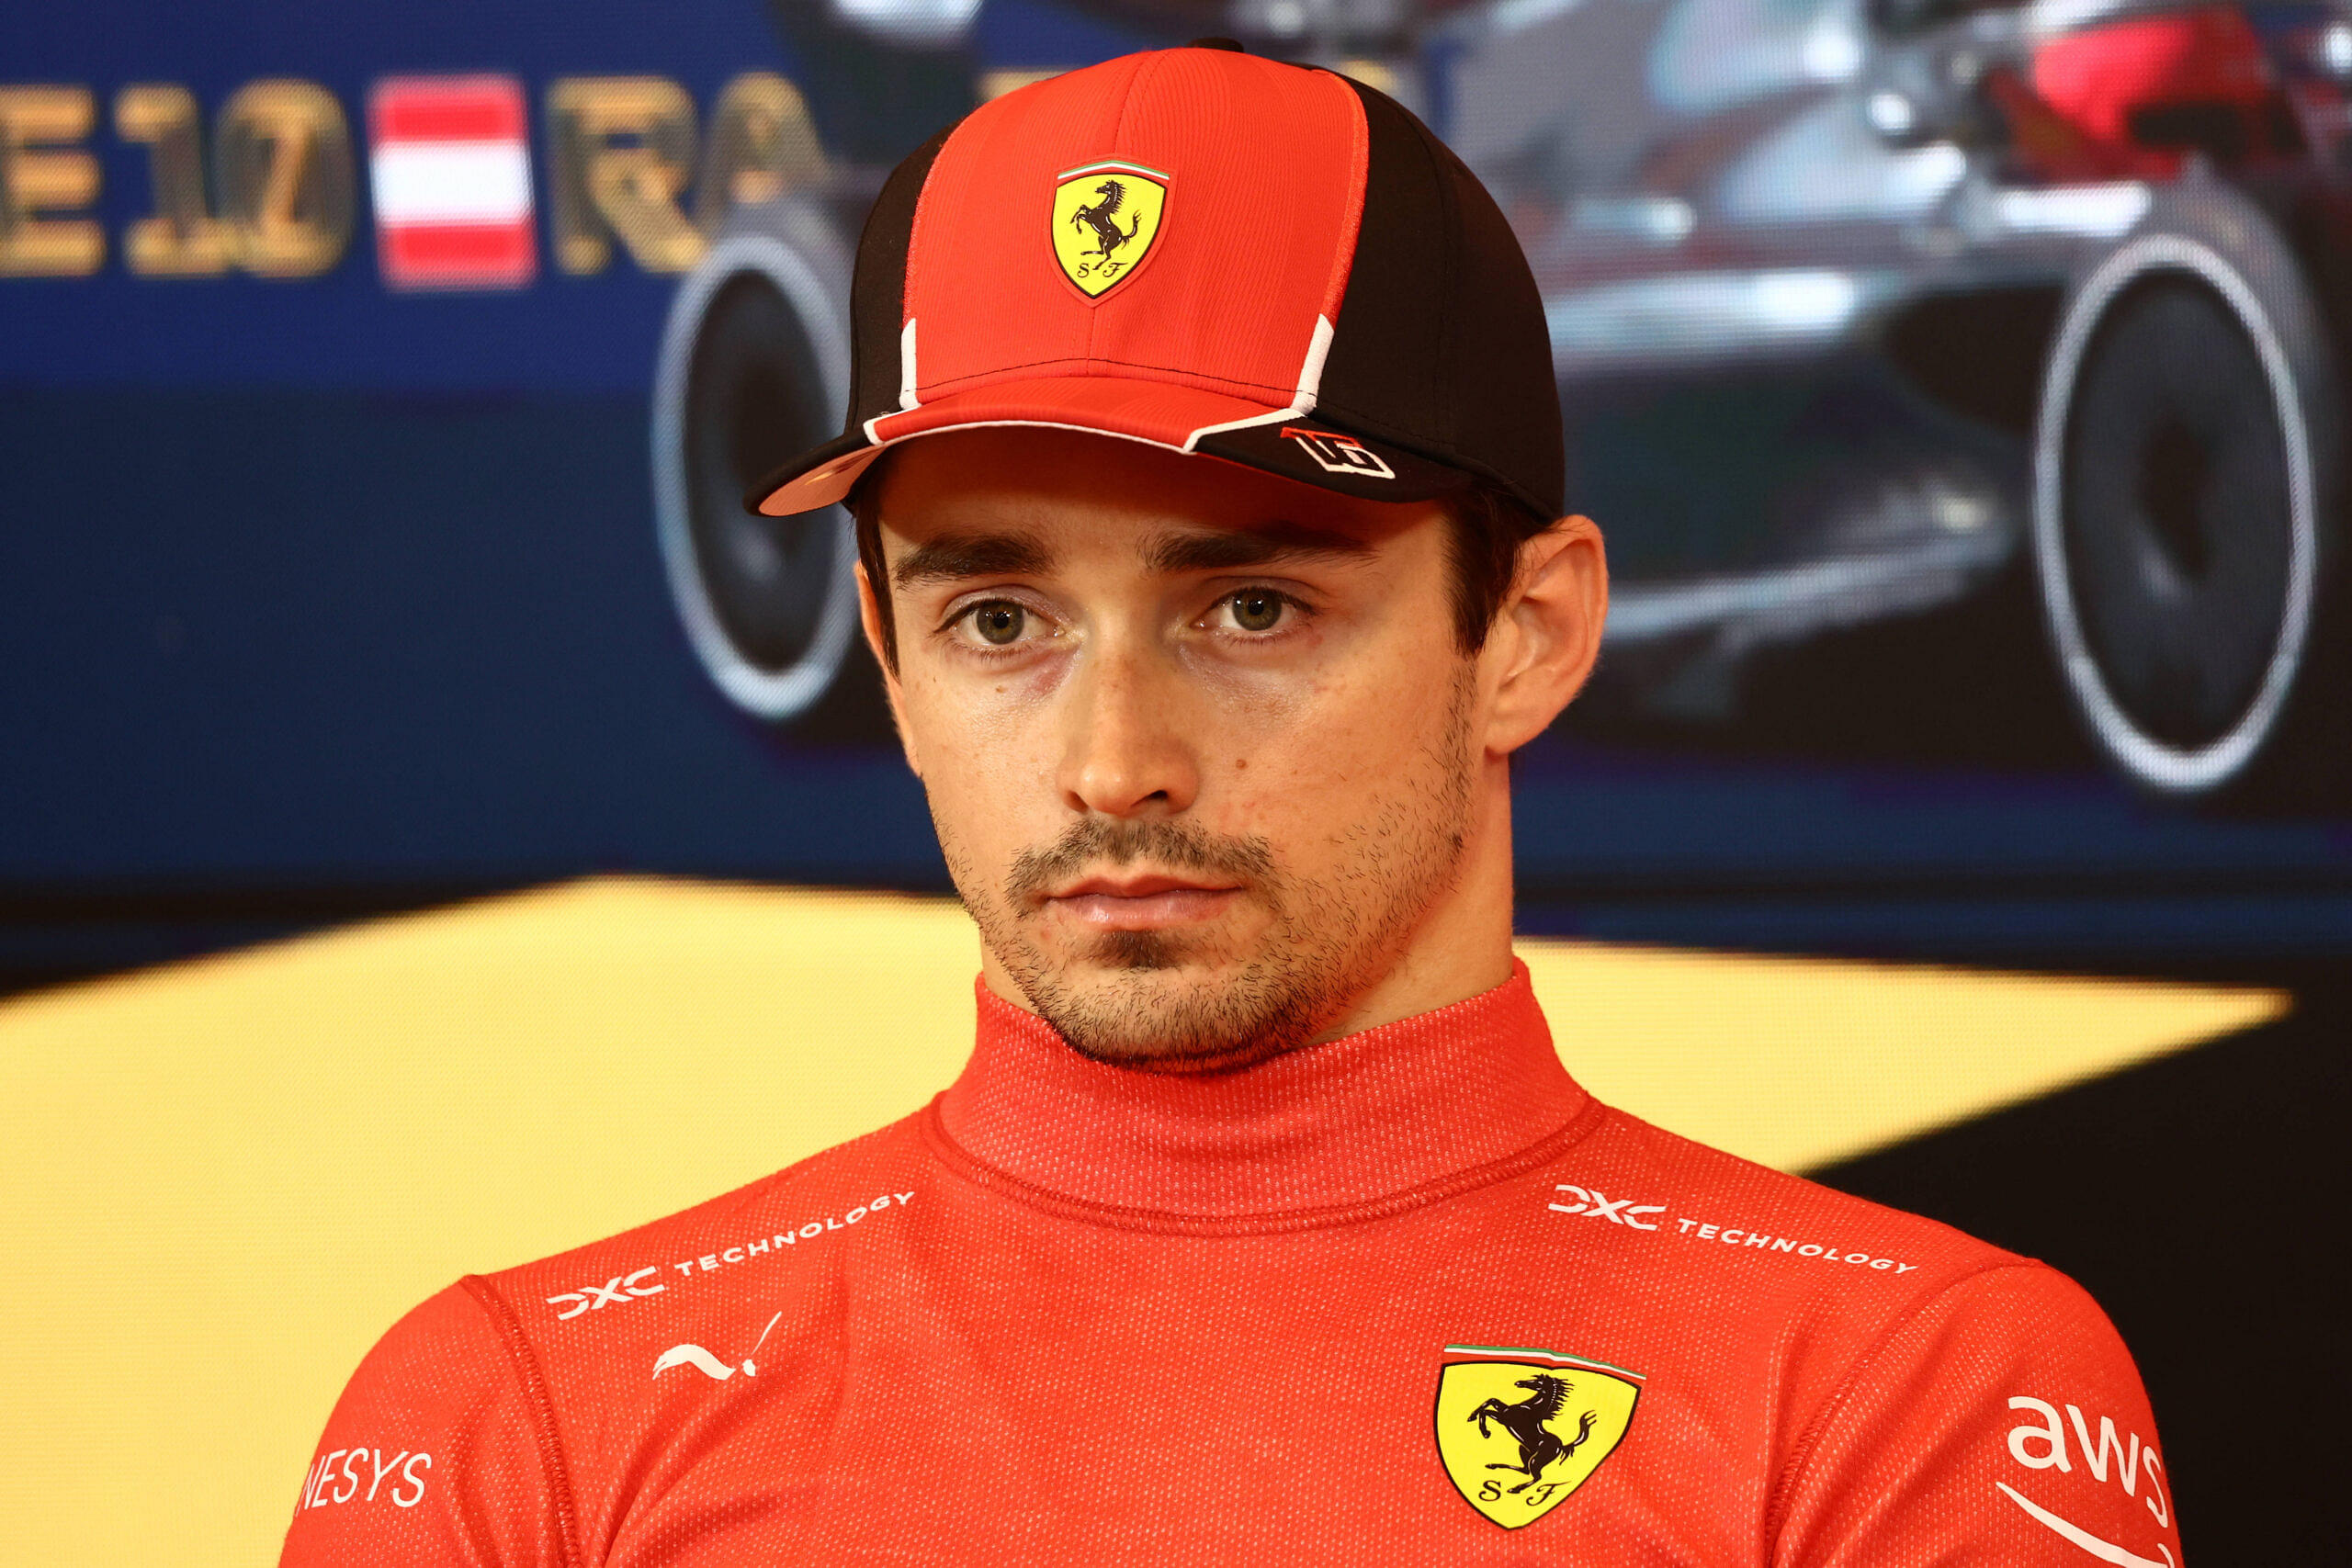 After Saying 'This is So Easy', Charles Leclerc Was Left Screaming With Frustration at the Easiest Task